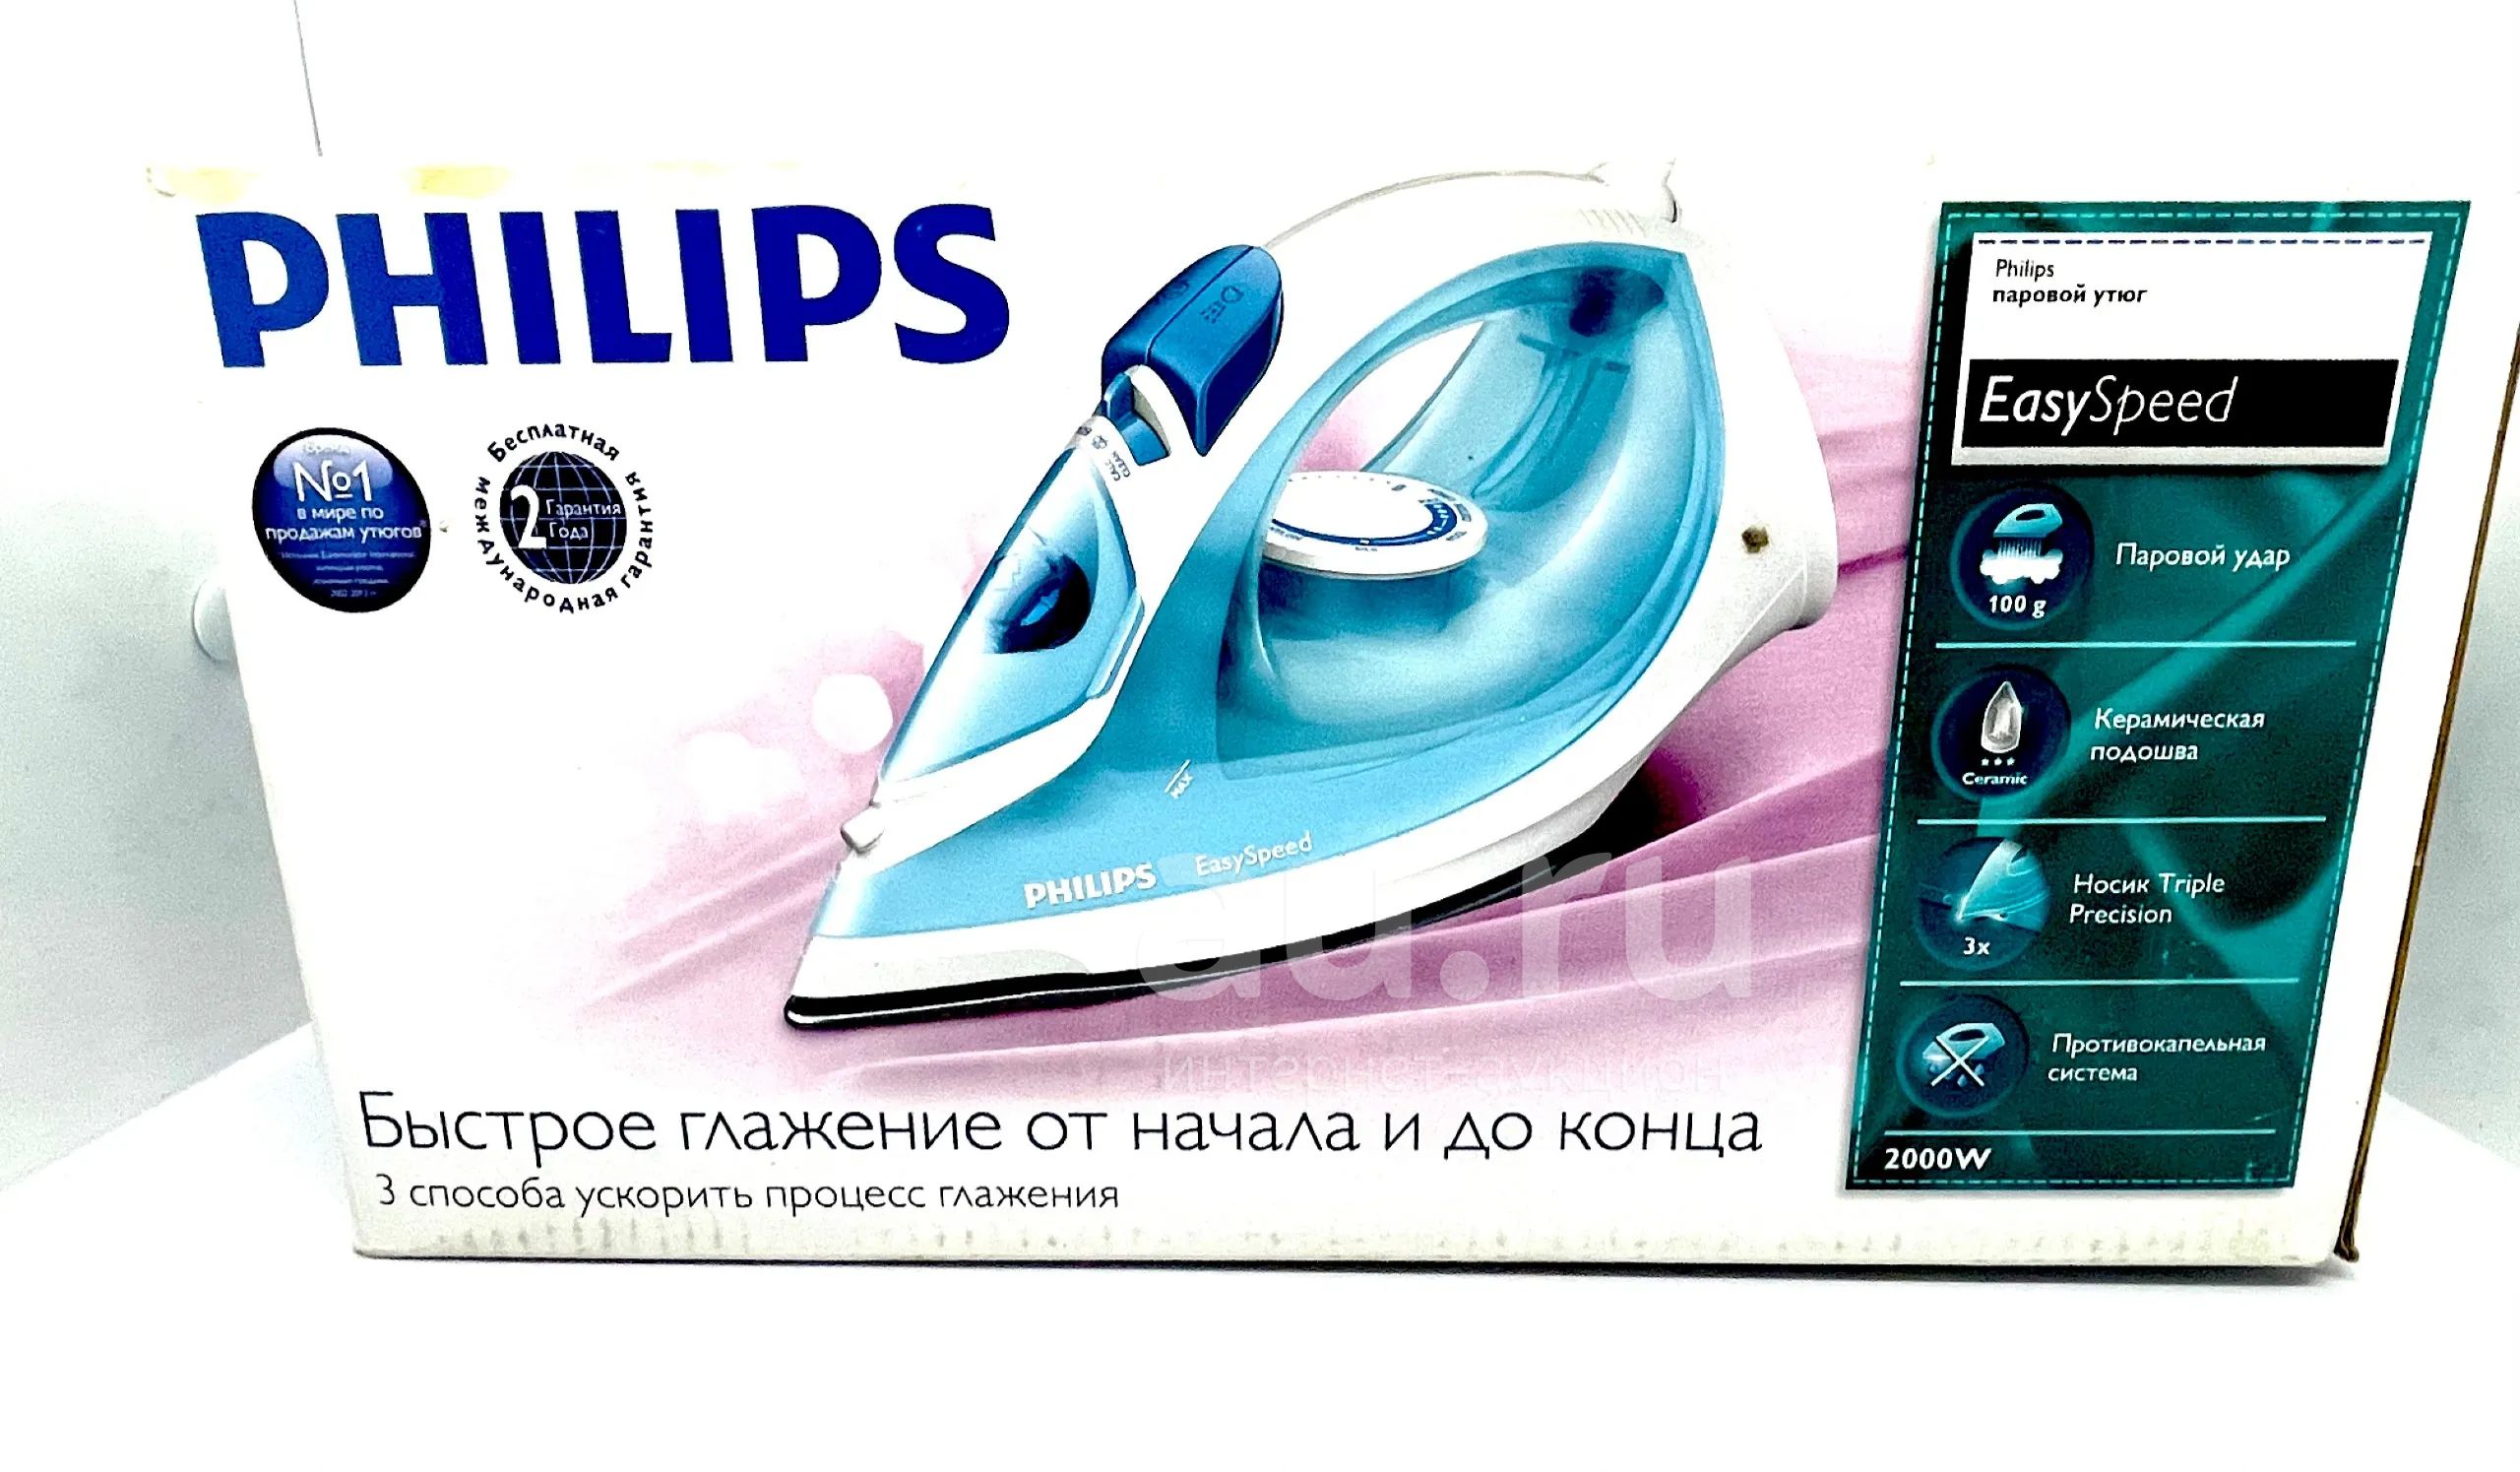 Philips mistral 44 steam boost фото 28